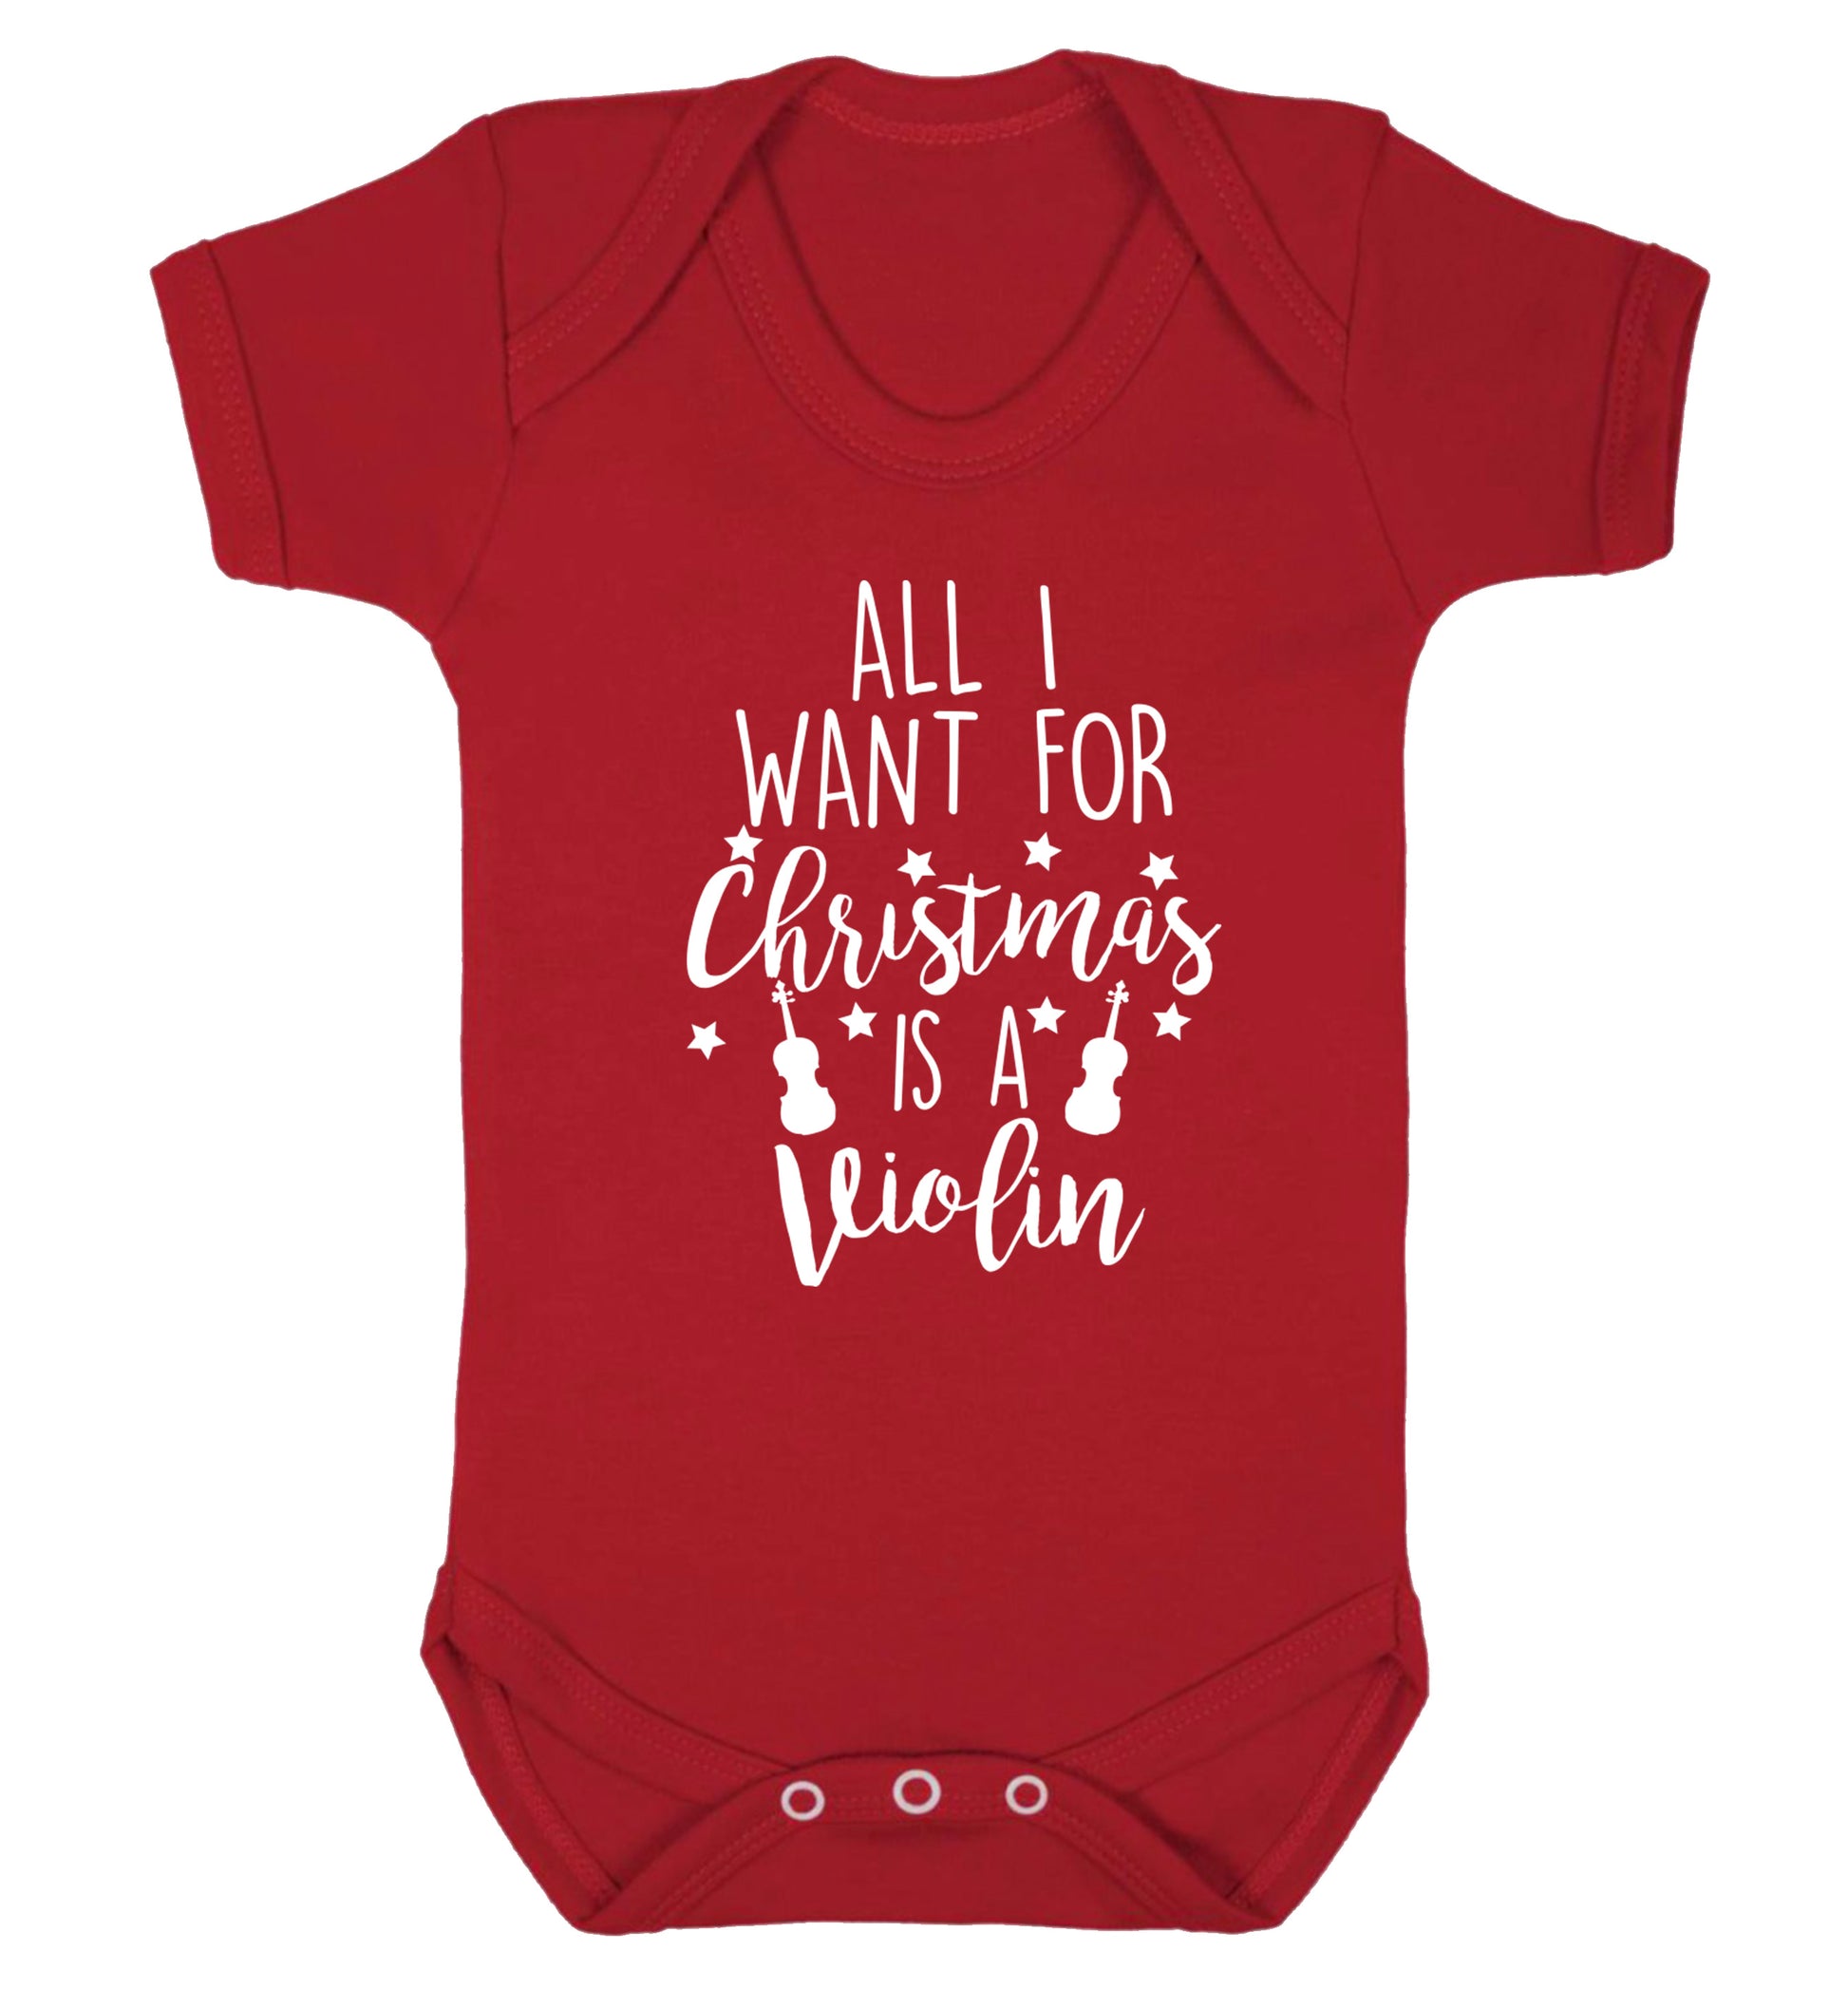 All I Want For Christmas is a Violin Baby Vest red 18-24 months